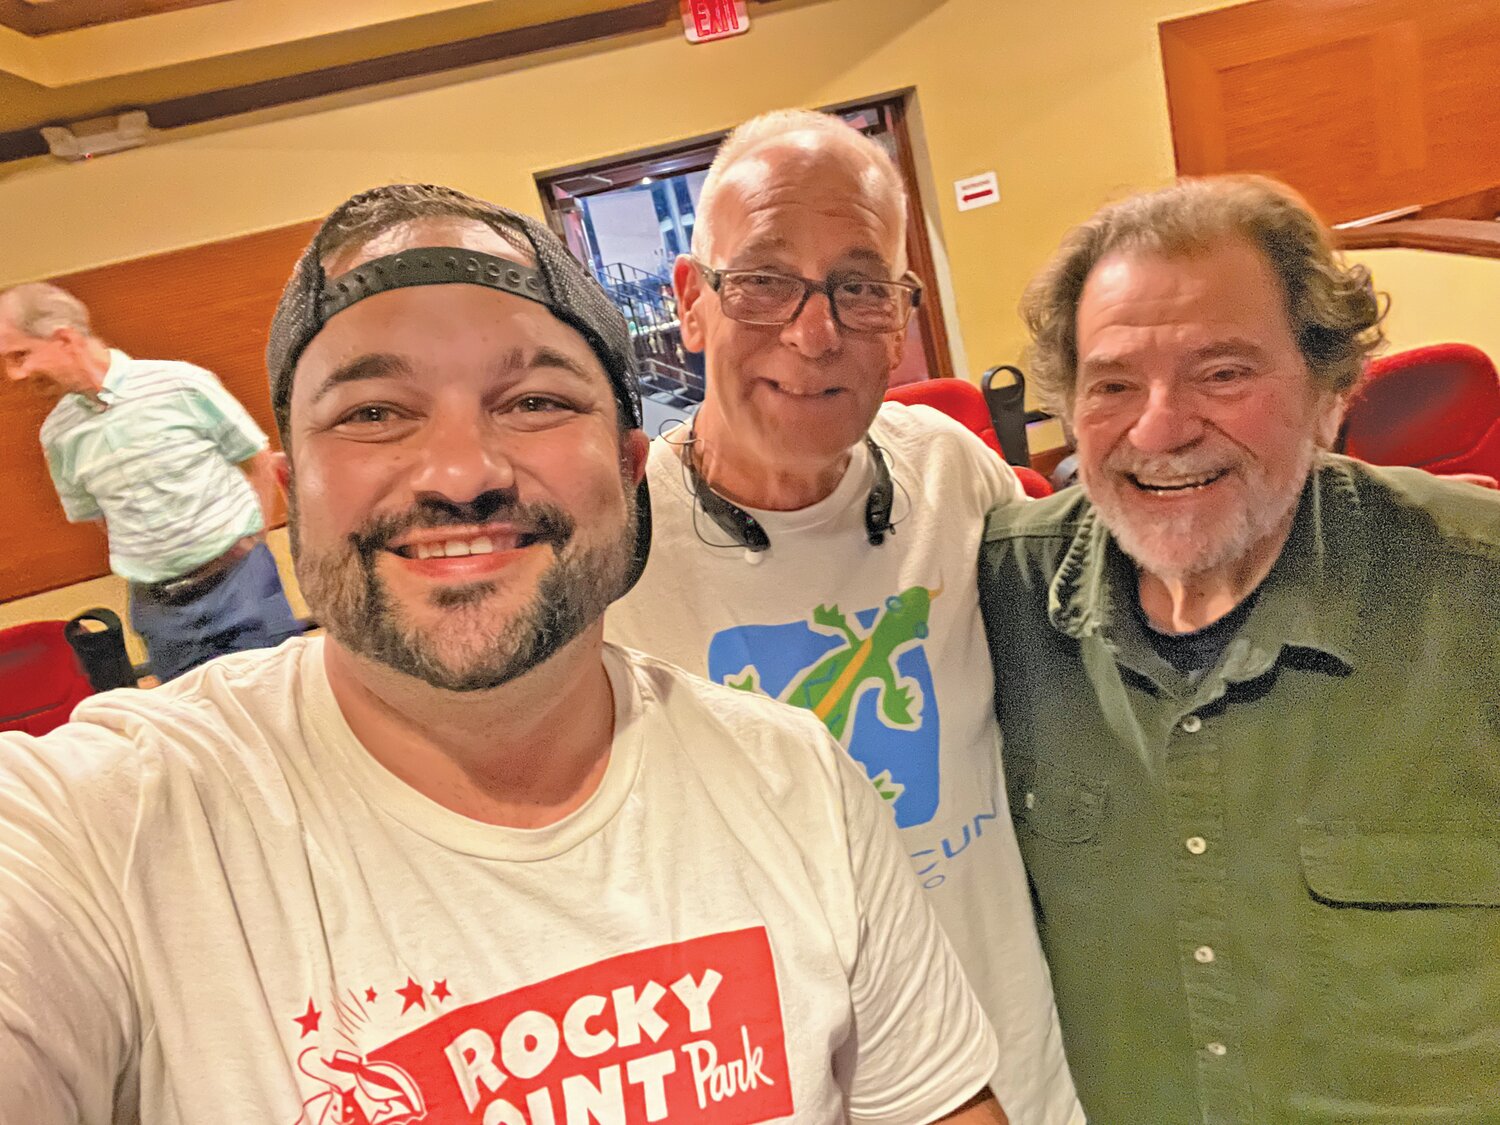 THEY BELIEVE IN DREAMS: Ed Brady, Dan Gauvin and Dennis Verduci (from Soundstage Productions) at the Park, celebrating Majesty the Queen on 9/9, which marked the theater's 99th anniversary.